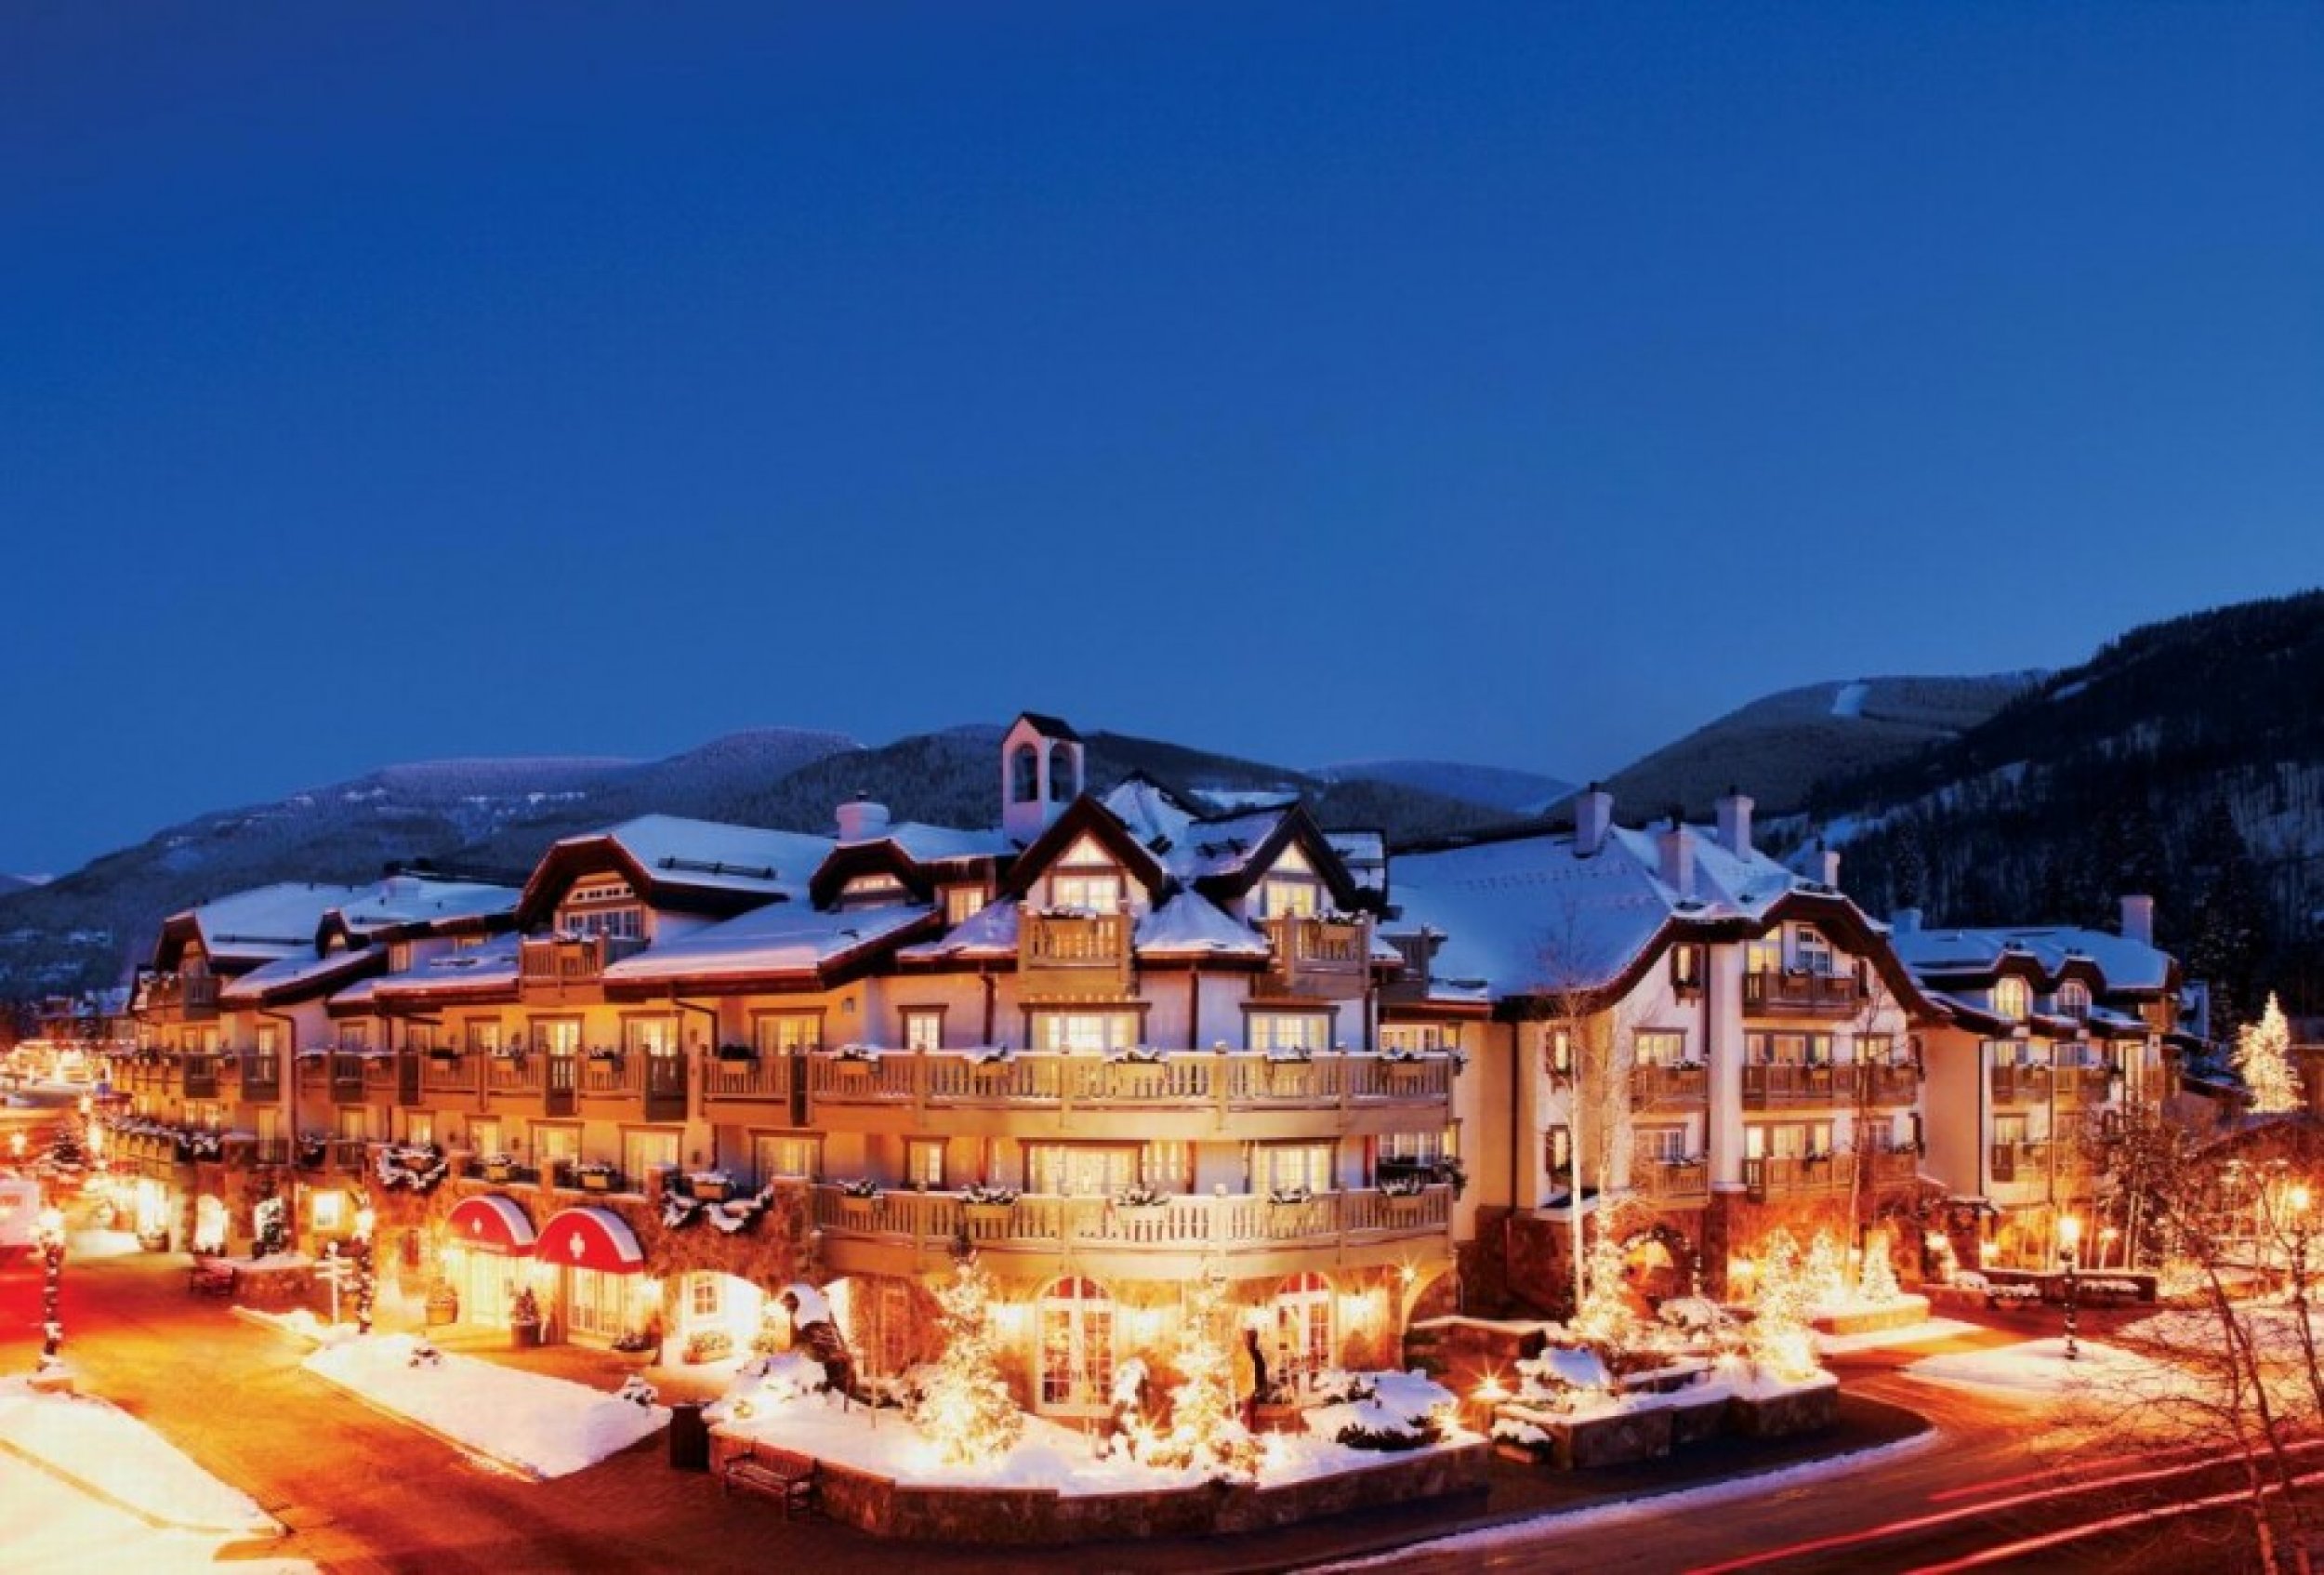 No. 8 Sonnenalp Resort of Vail 4.5 stars, Vail, Colo.